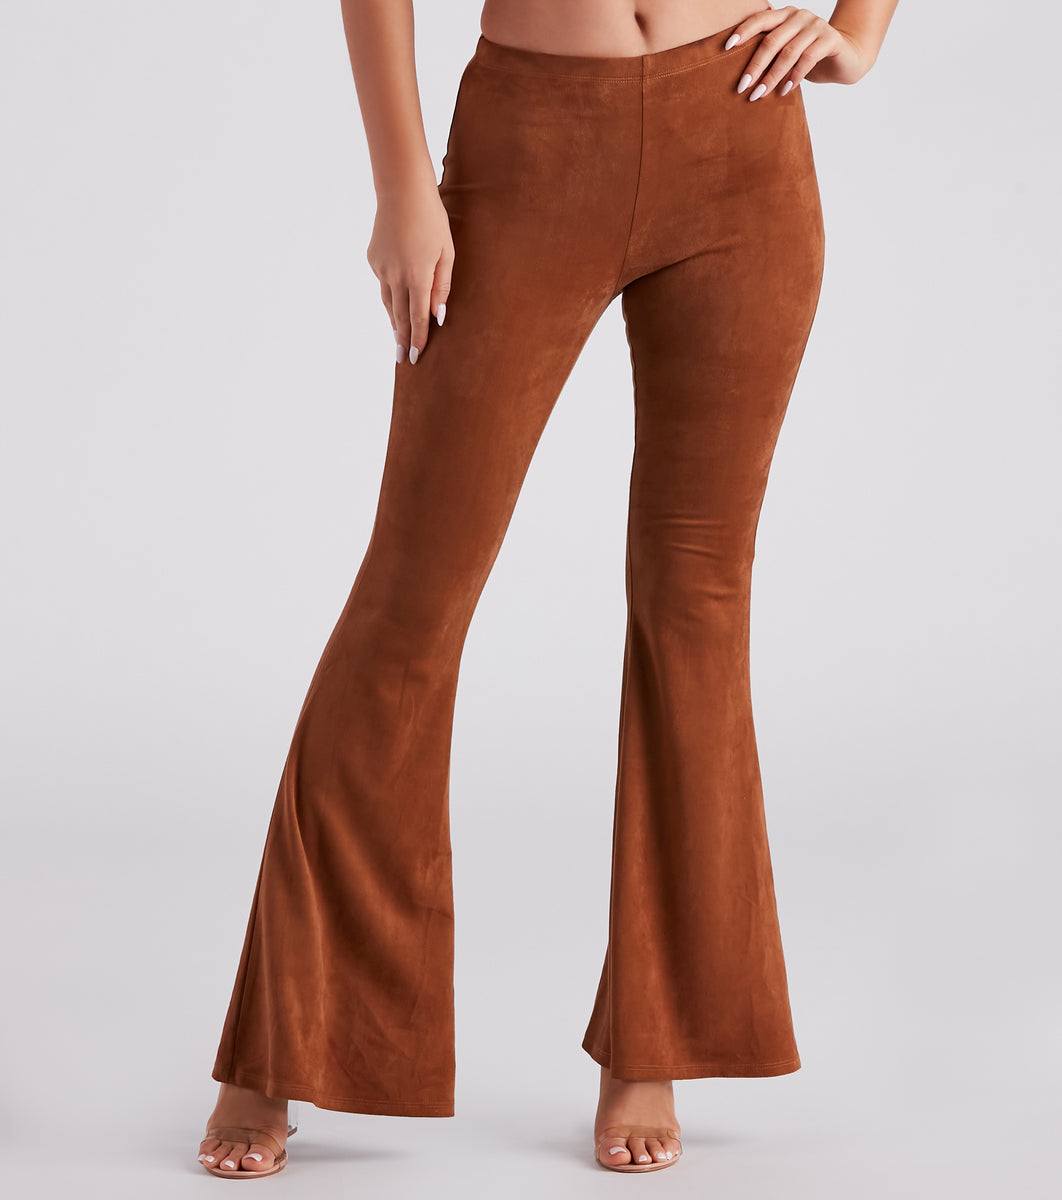 Jm Collection Petite Curvy Pants, Created for Macy's